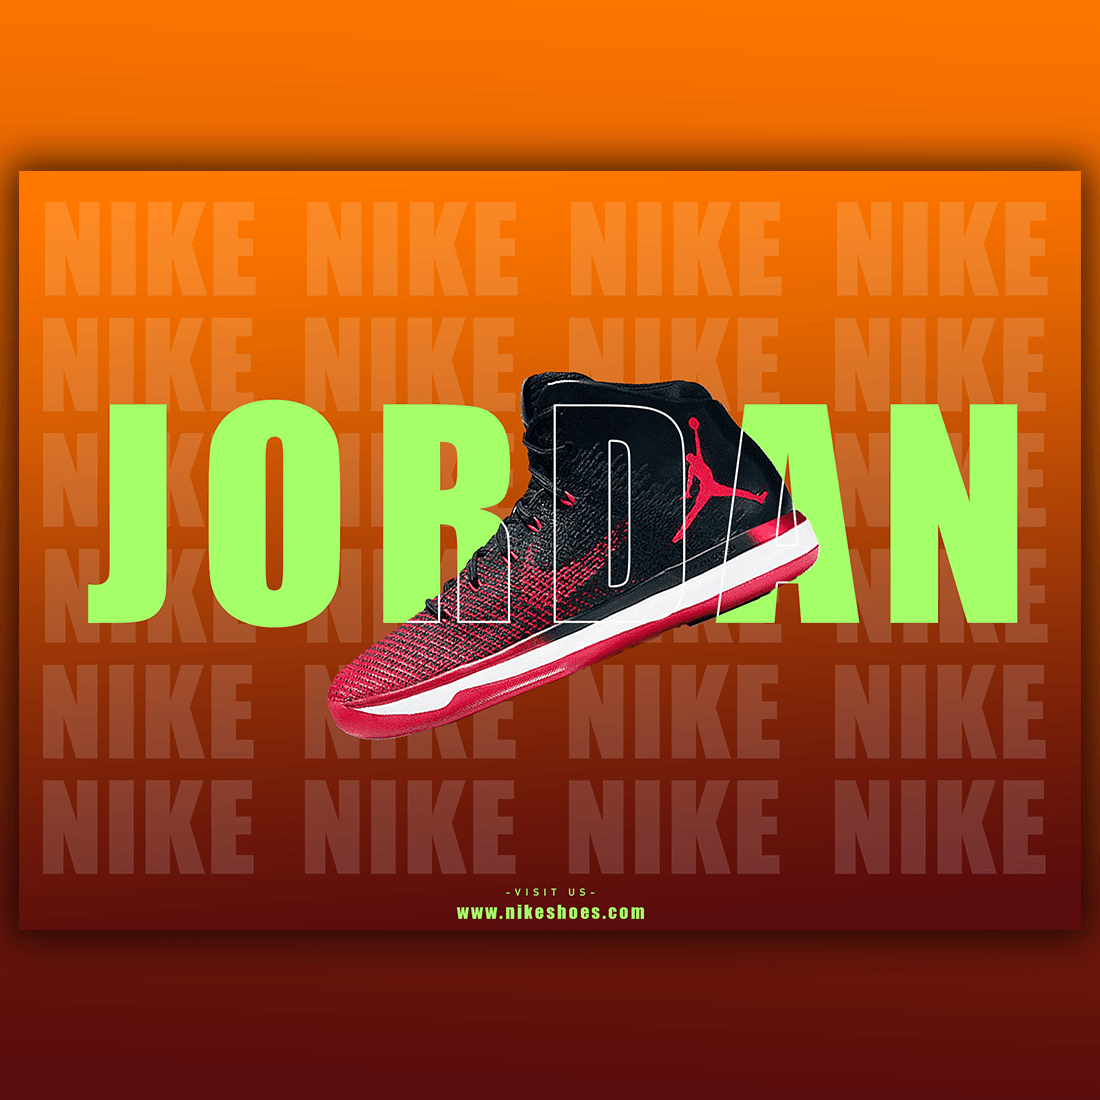 Nike Shoe Poster and Social Media Banner cover image.